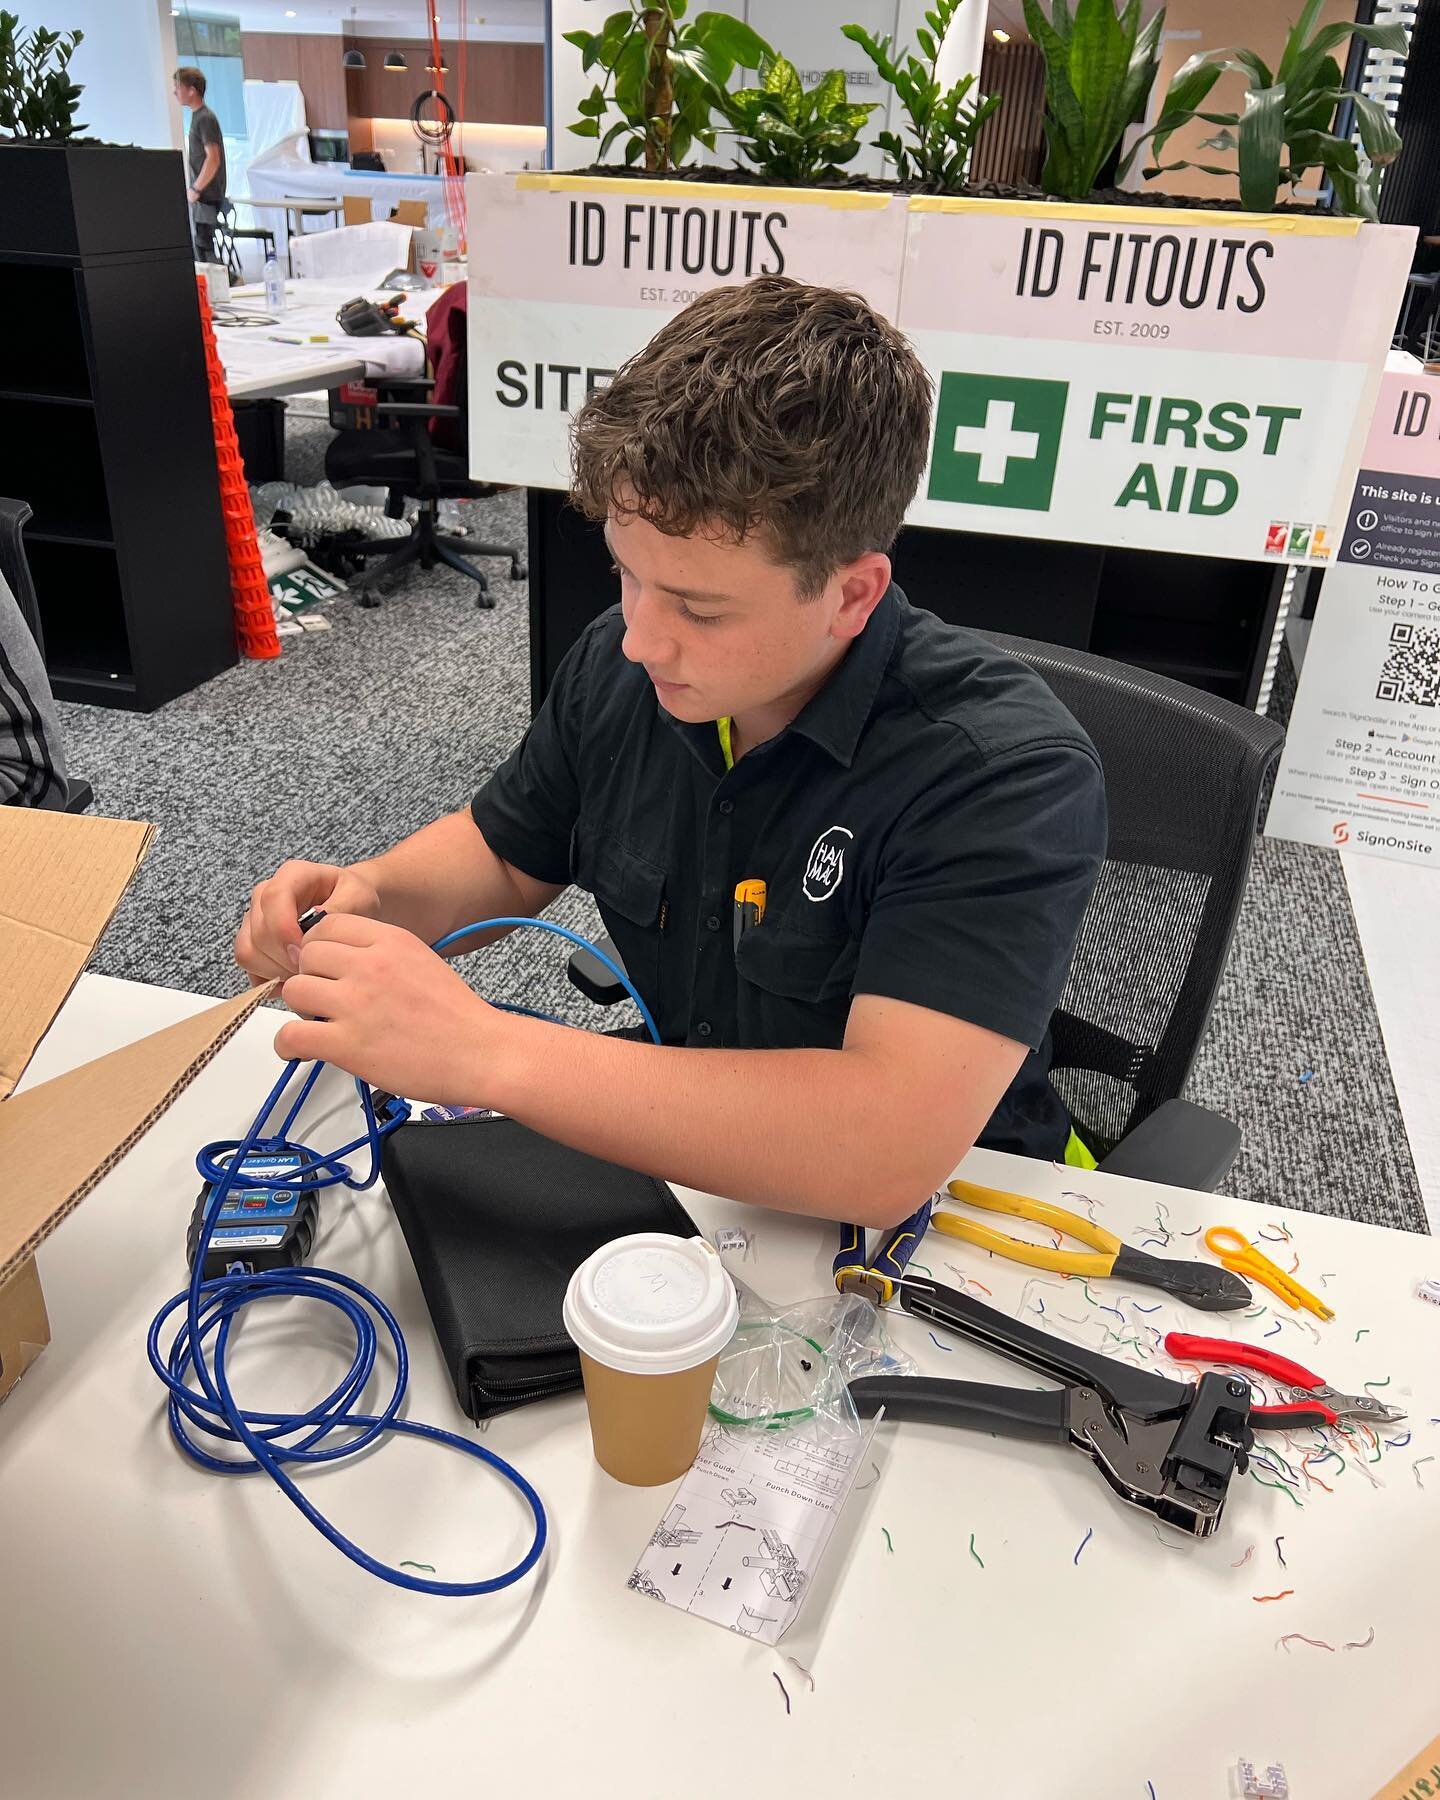 Last week we had Jesse, a current year 11 student, do a week of work experience with us. After showing his enthusiasm and hard work, along with the HALLMAC pride, he received positive commentary from senior staff on his sites, and has as a result bee